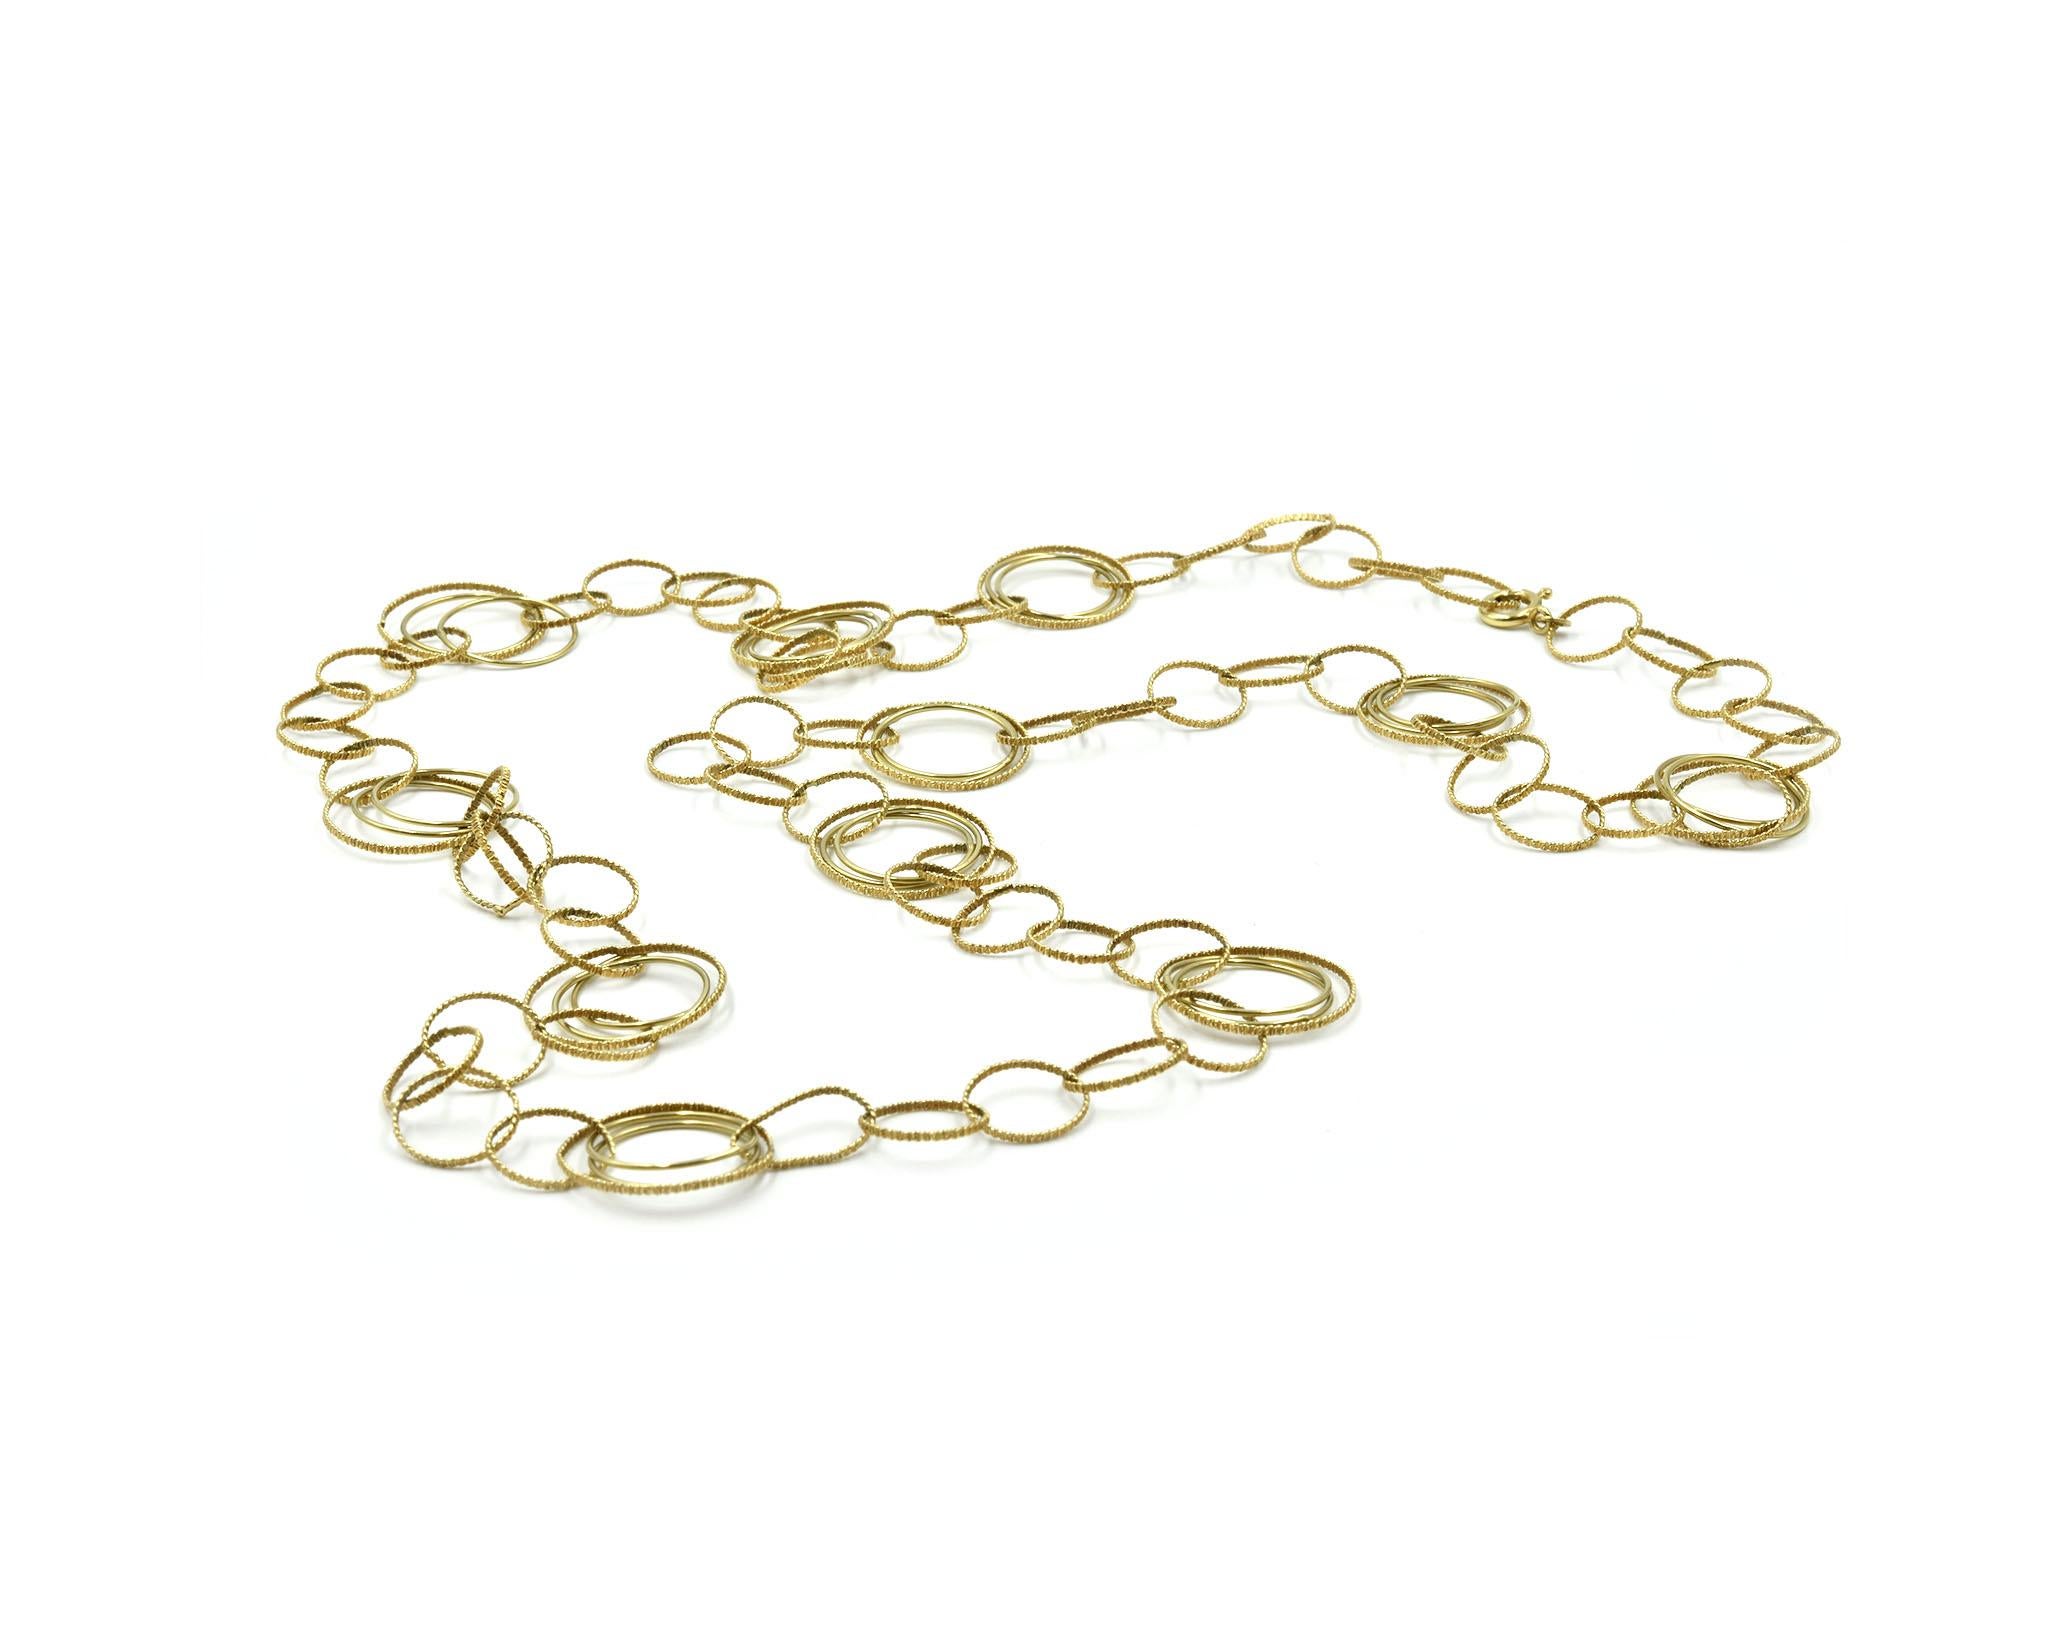 Designer: custom design
Material: 14k yellow gold
Dimensions: necklace measures 36-inches long and 3/4-inches wide
Weight: 33.68 grams
